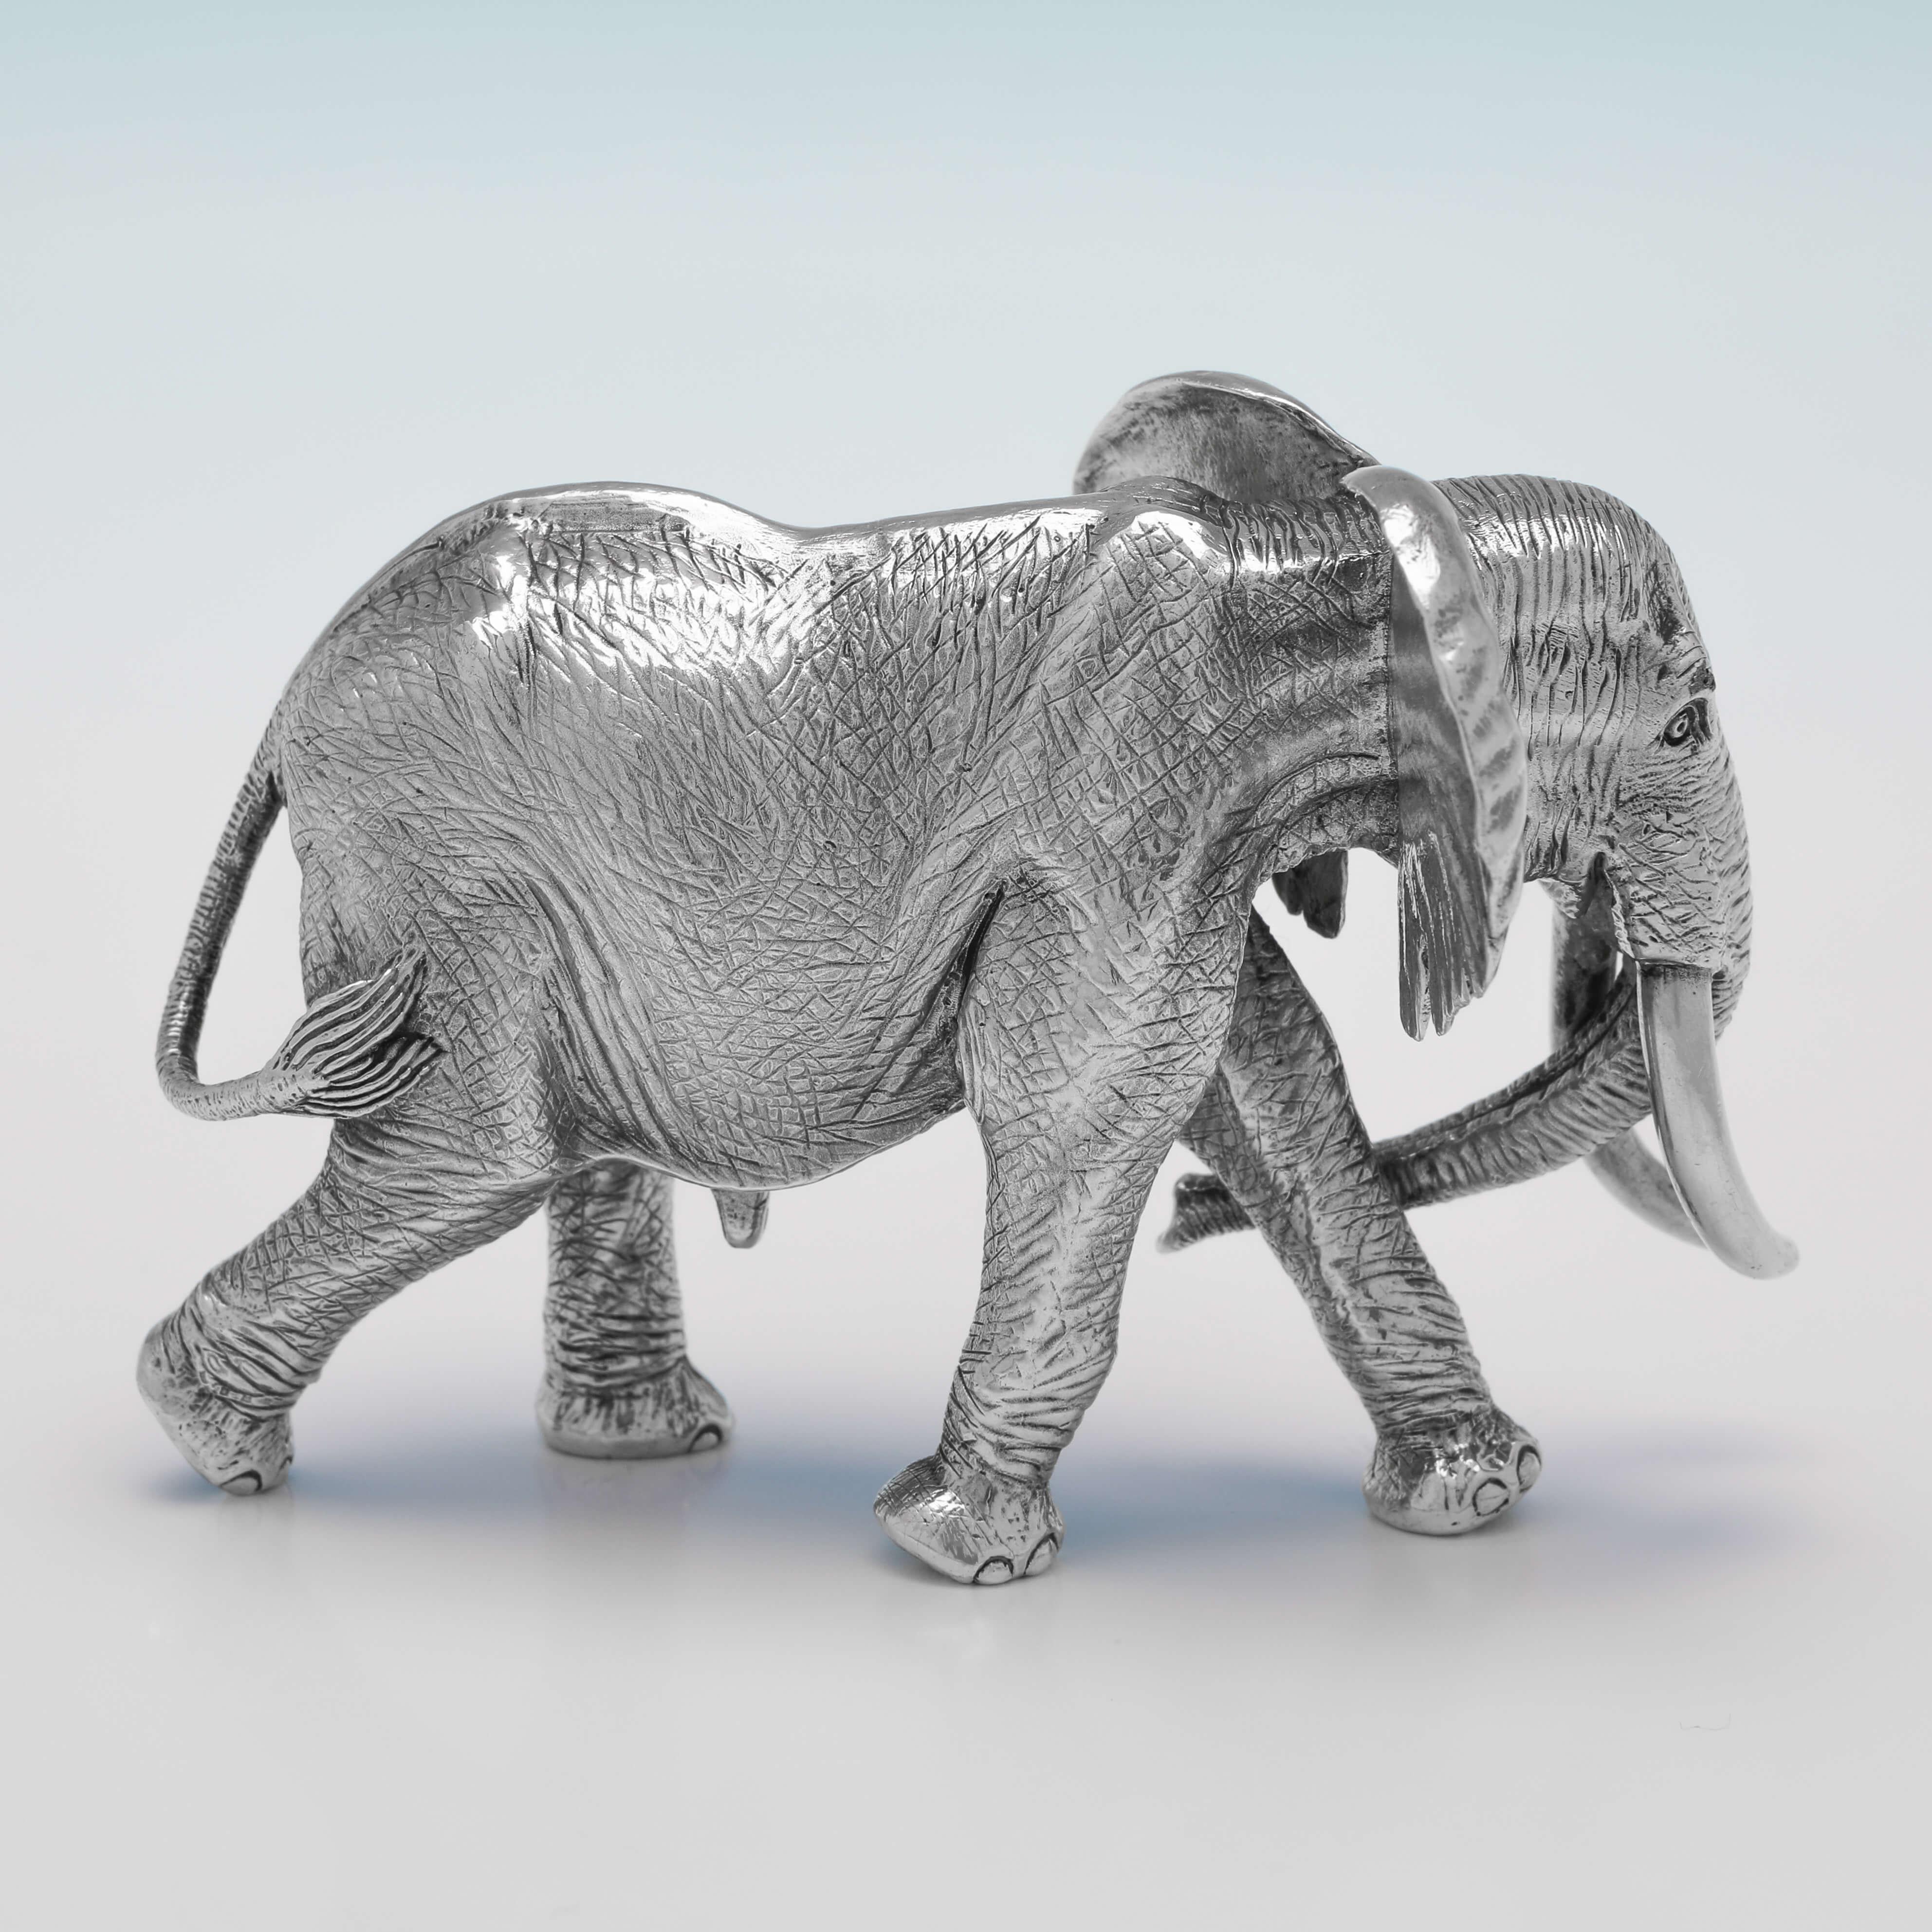 Hallmarked in London in 2005 by Patrick Mavros, this very handsome, Sterling Silver Model of an Elephant, is expertly modelled, and is a representation of an elephant named Joao, one of the 'Magnificent Seven Elephants' who lived at the Kruger